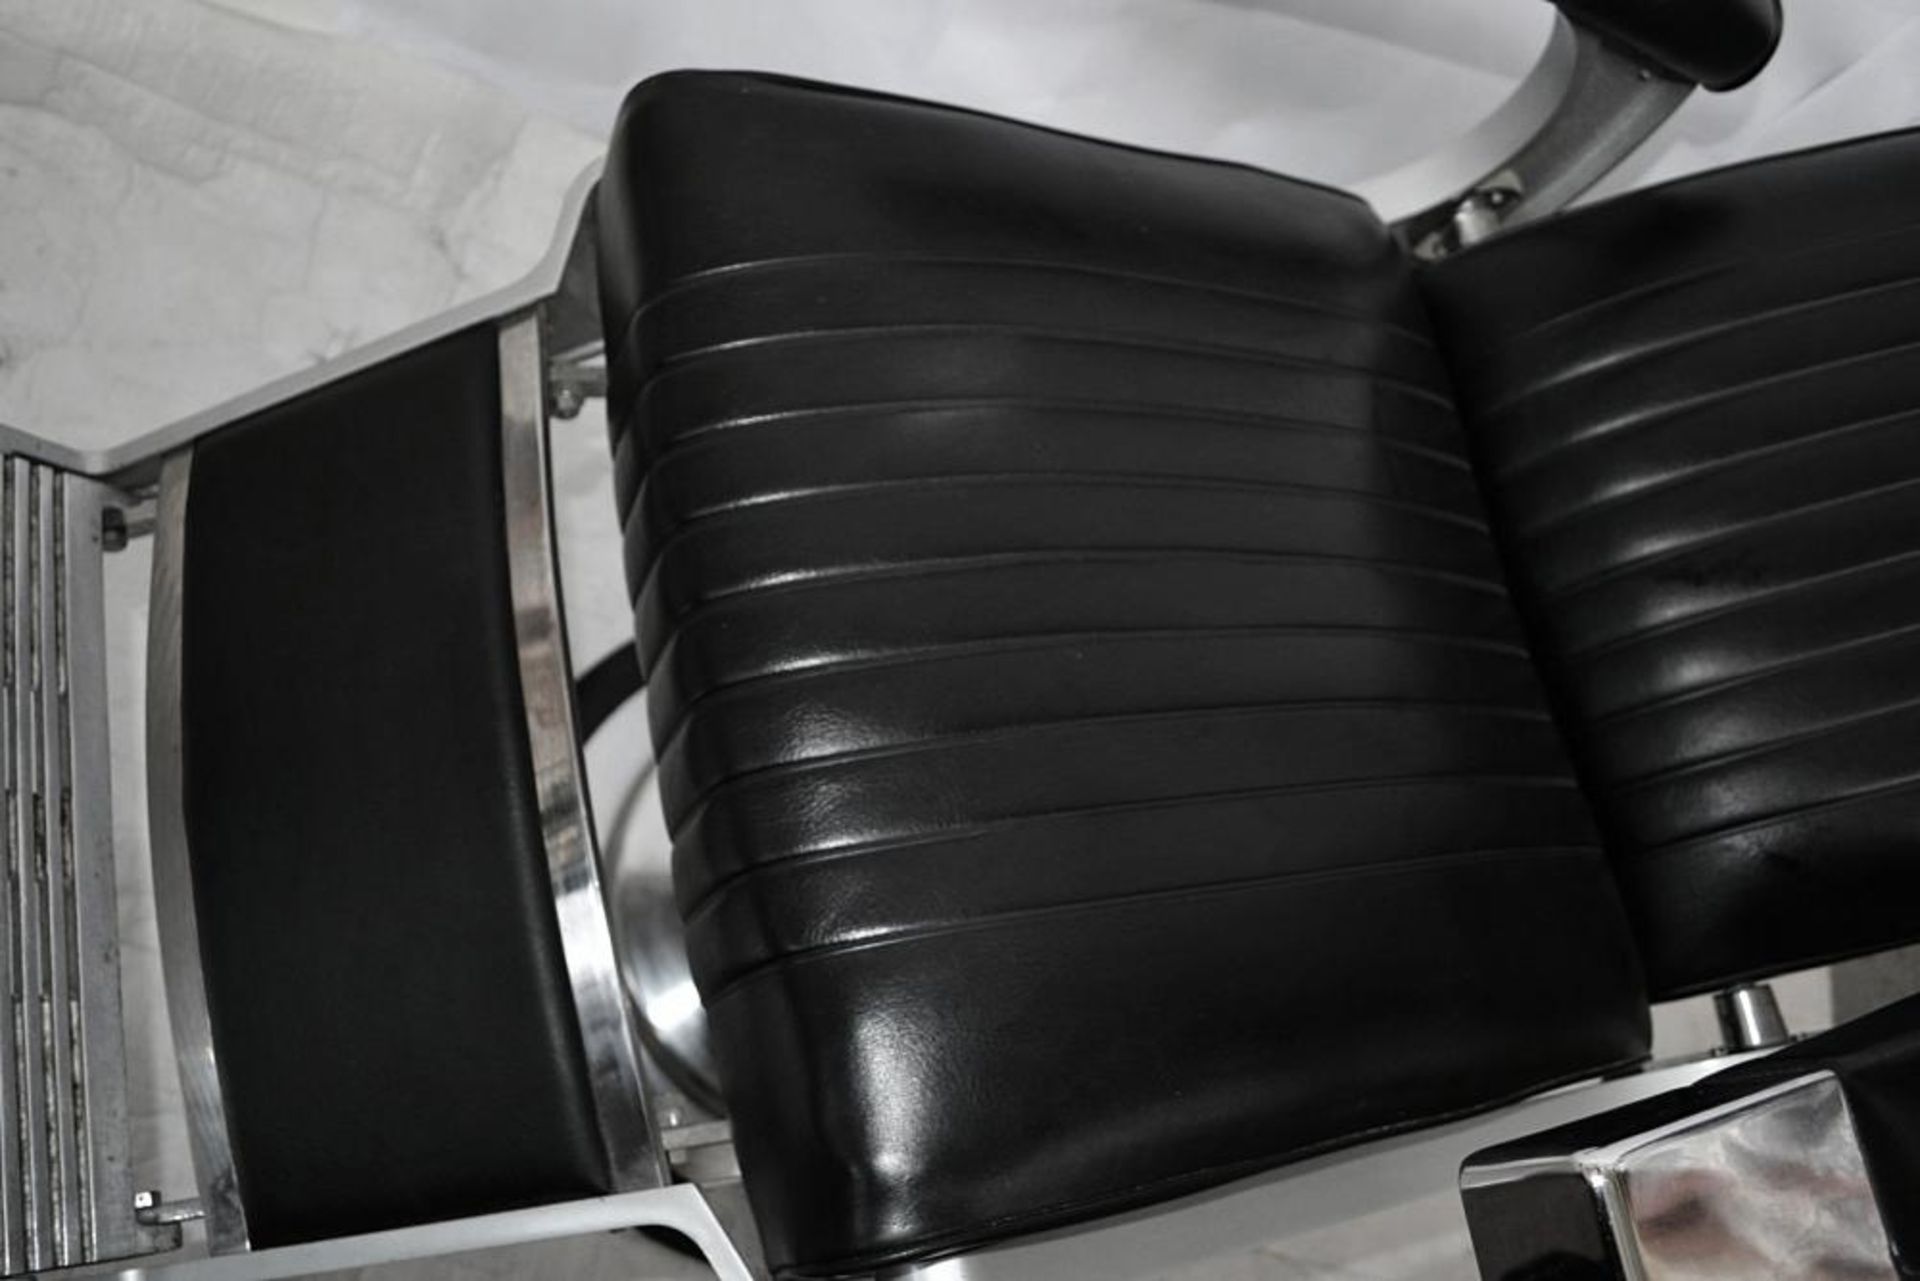 1 x Takara BELMONT "Apollo 2" Barbers Chair - Recently Taken From A Premier West-End Male Grooming S - Image 19 of 19